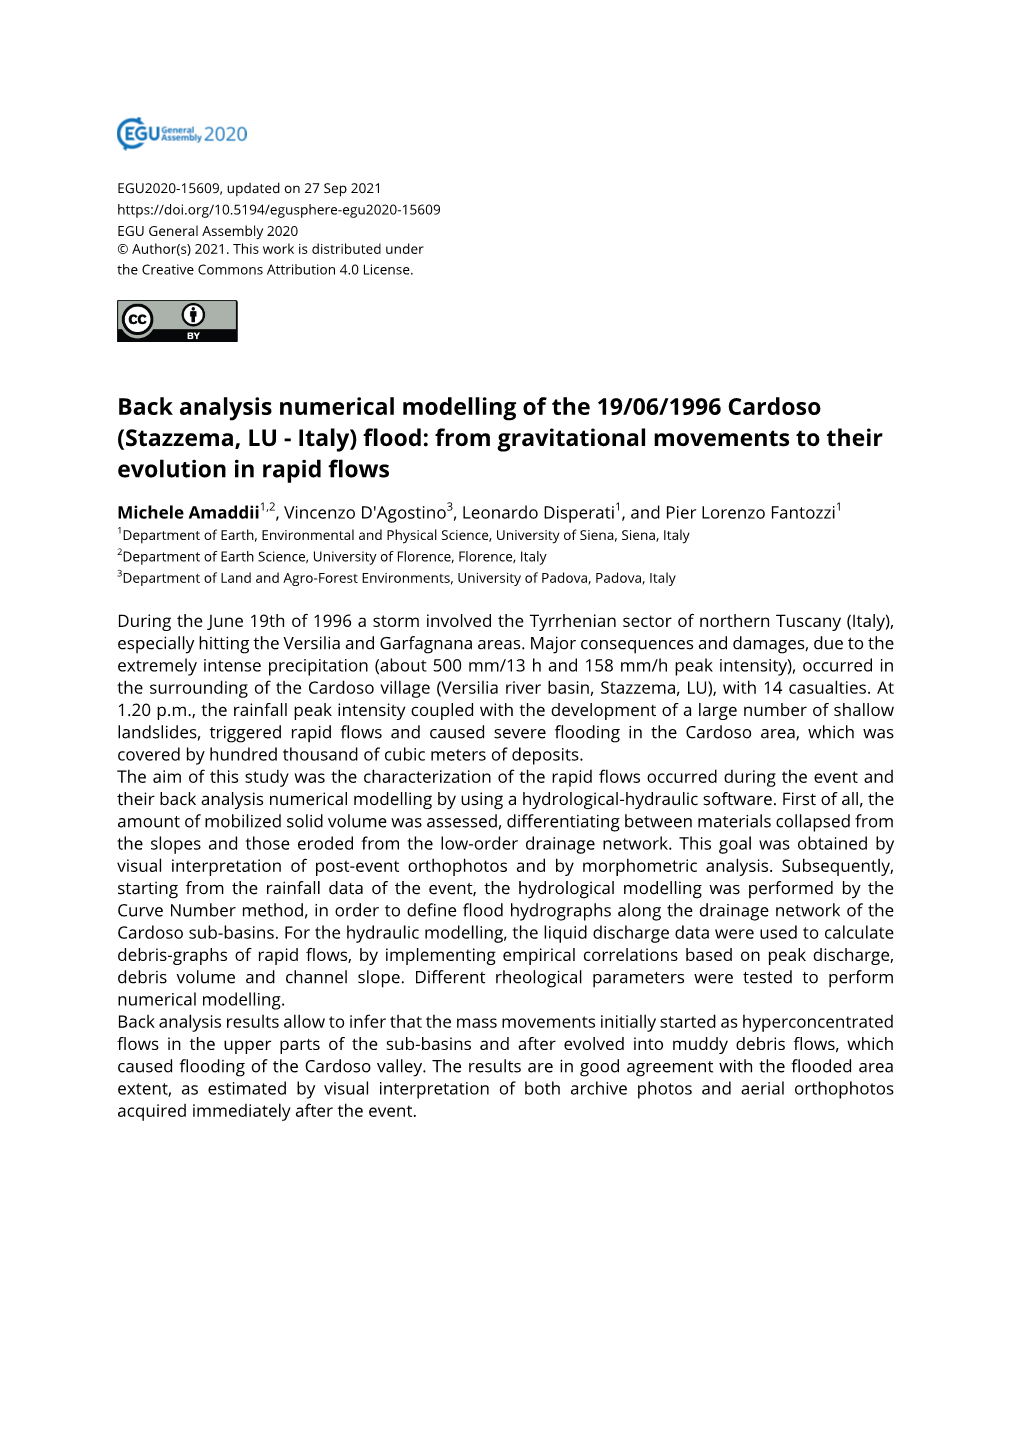 Back Analysis Numerical Modelling of the 19/06/1996 Cardoso (Stazzema, LU - Italy) Flood: from Gravitational Movements to Their Evolution in Rapid Flows